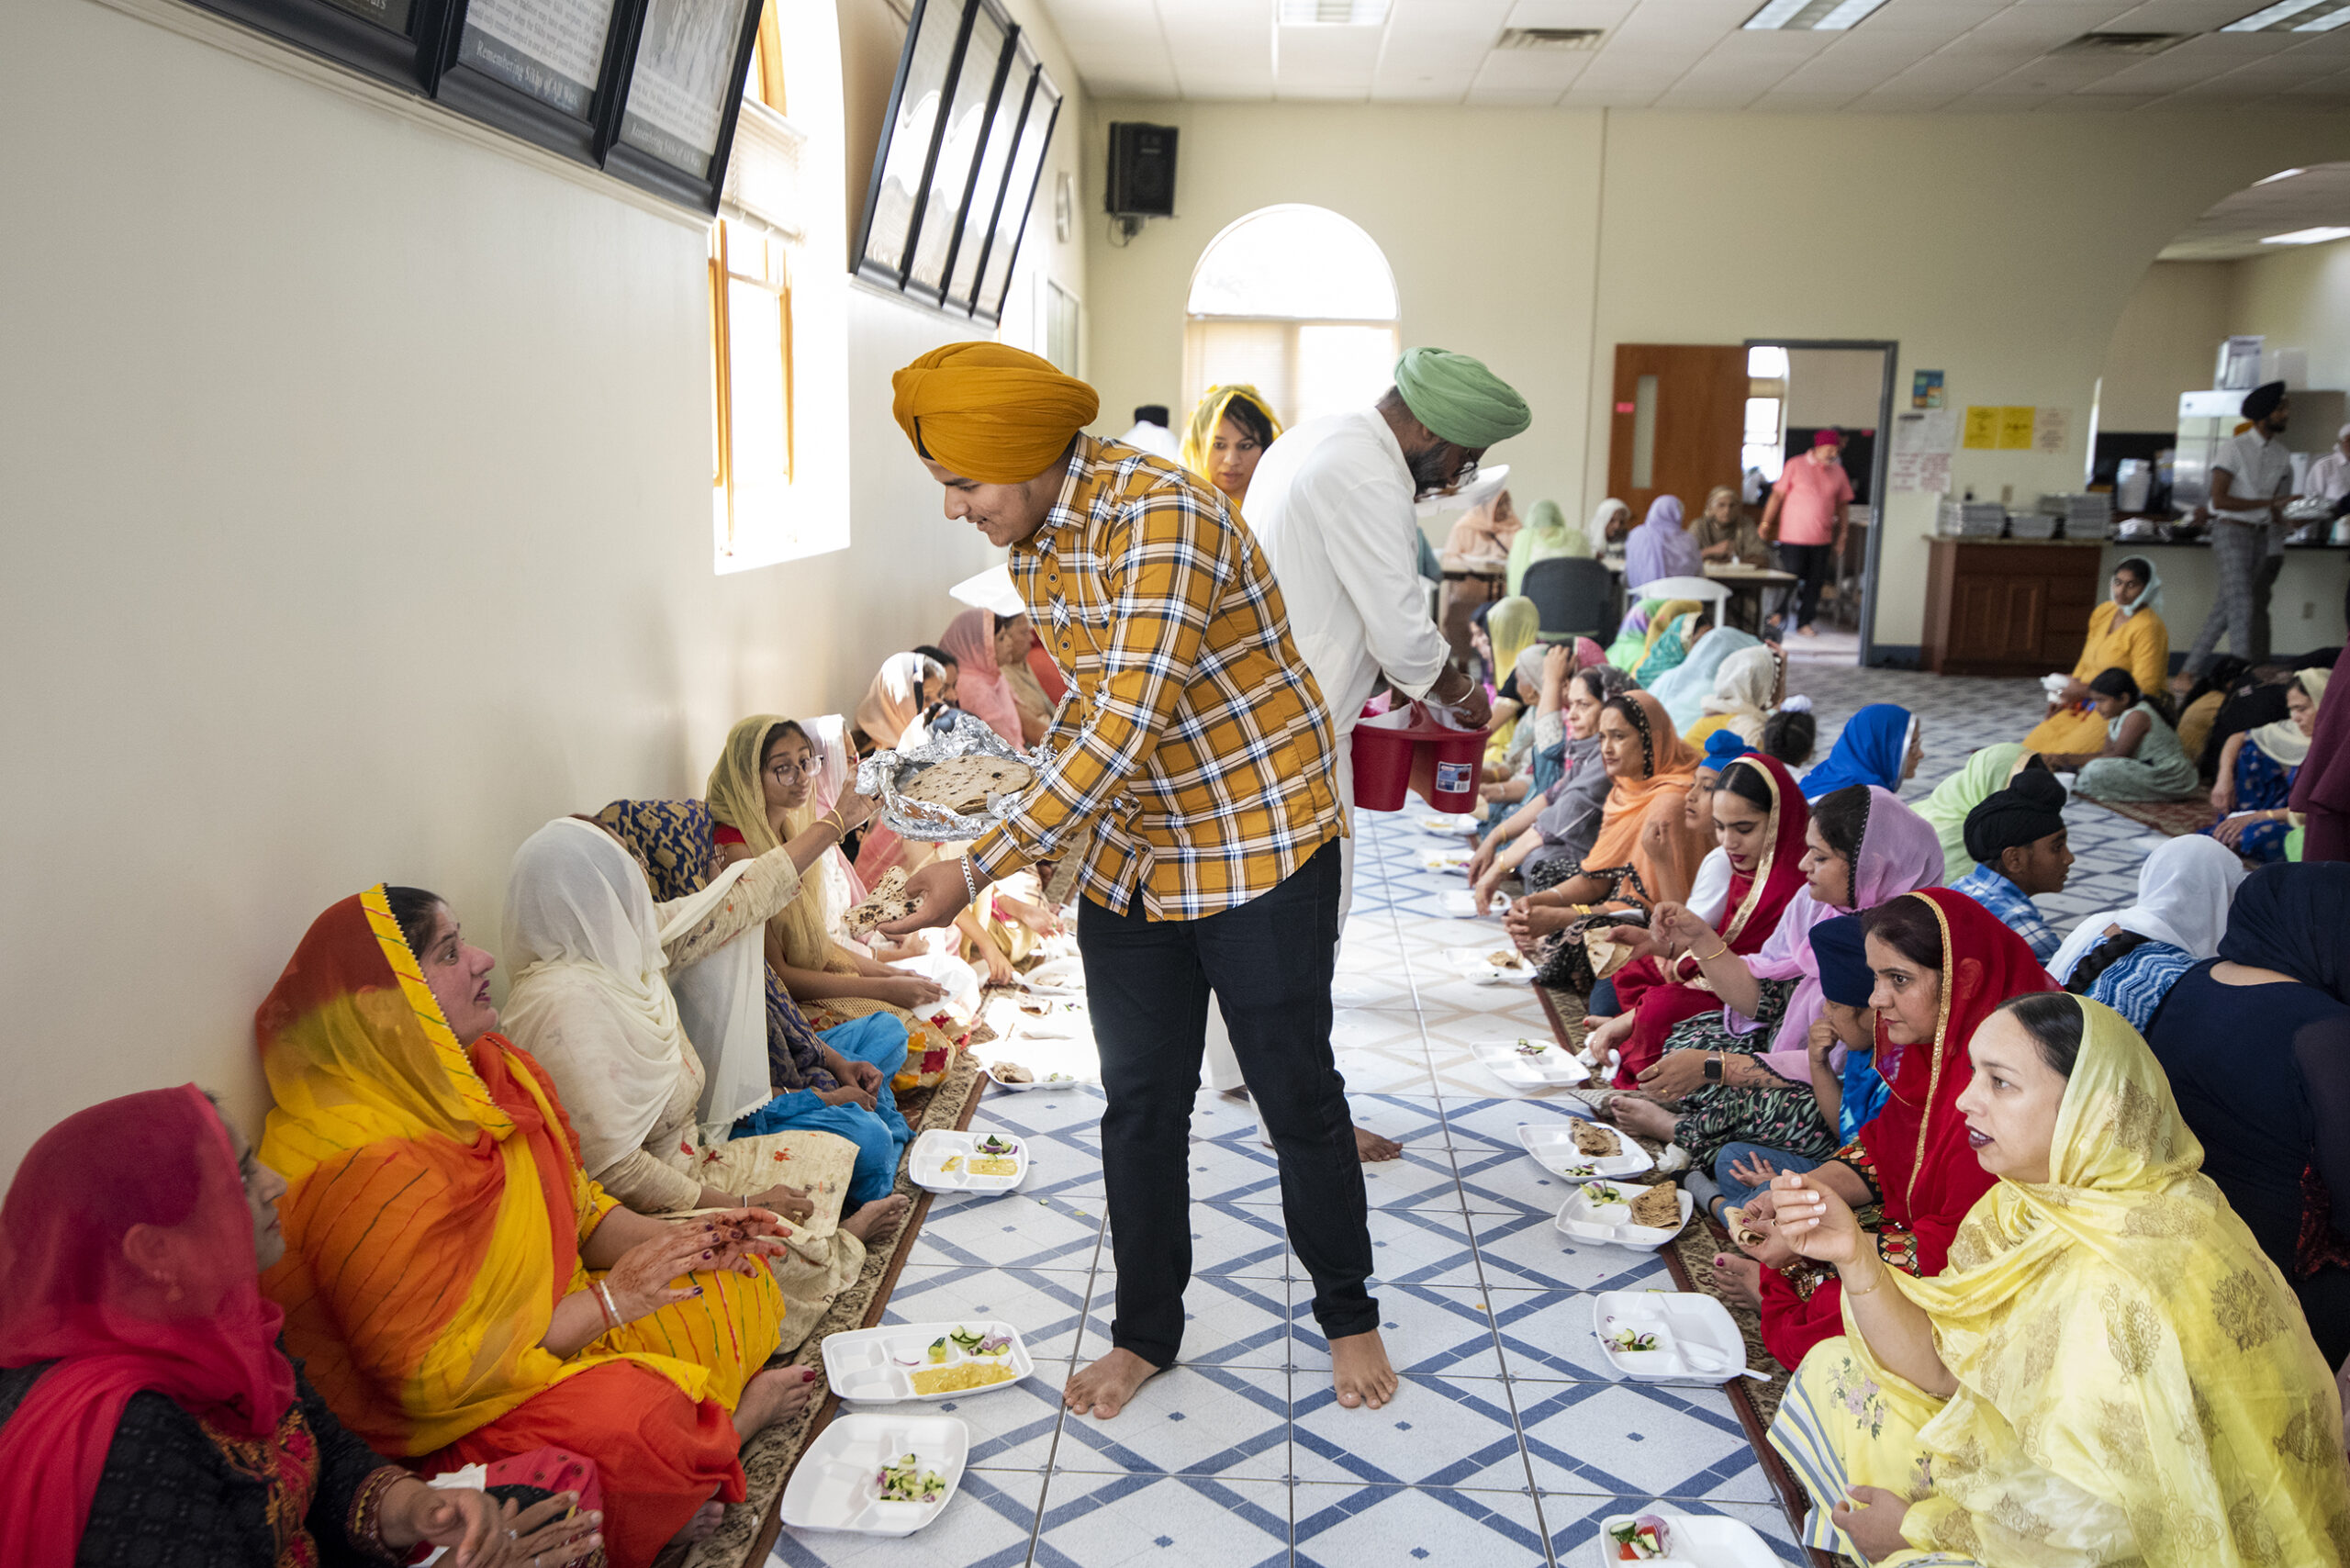 A man serves temple members who sit on the ground together to enjoy a meal.